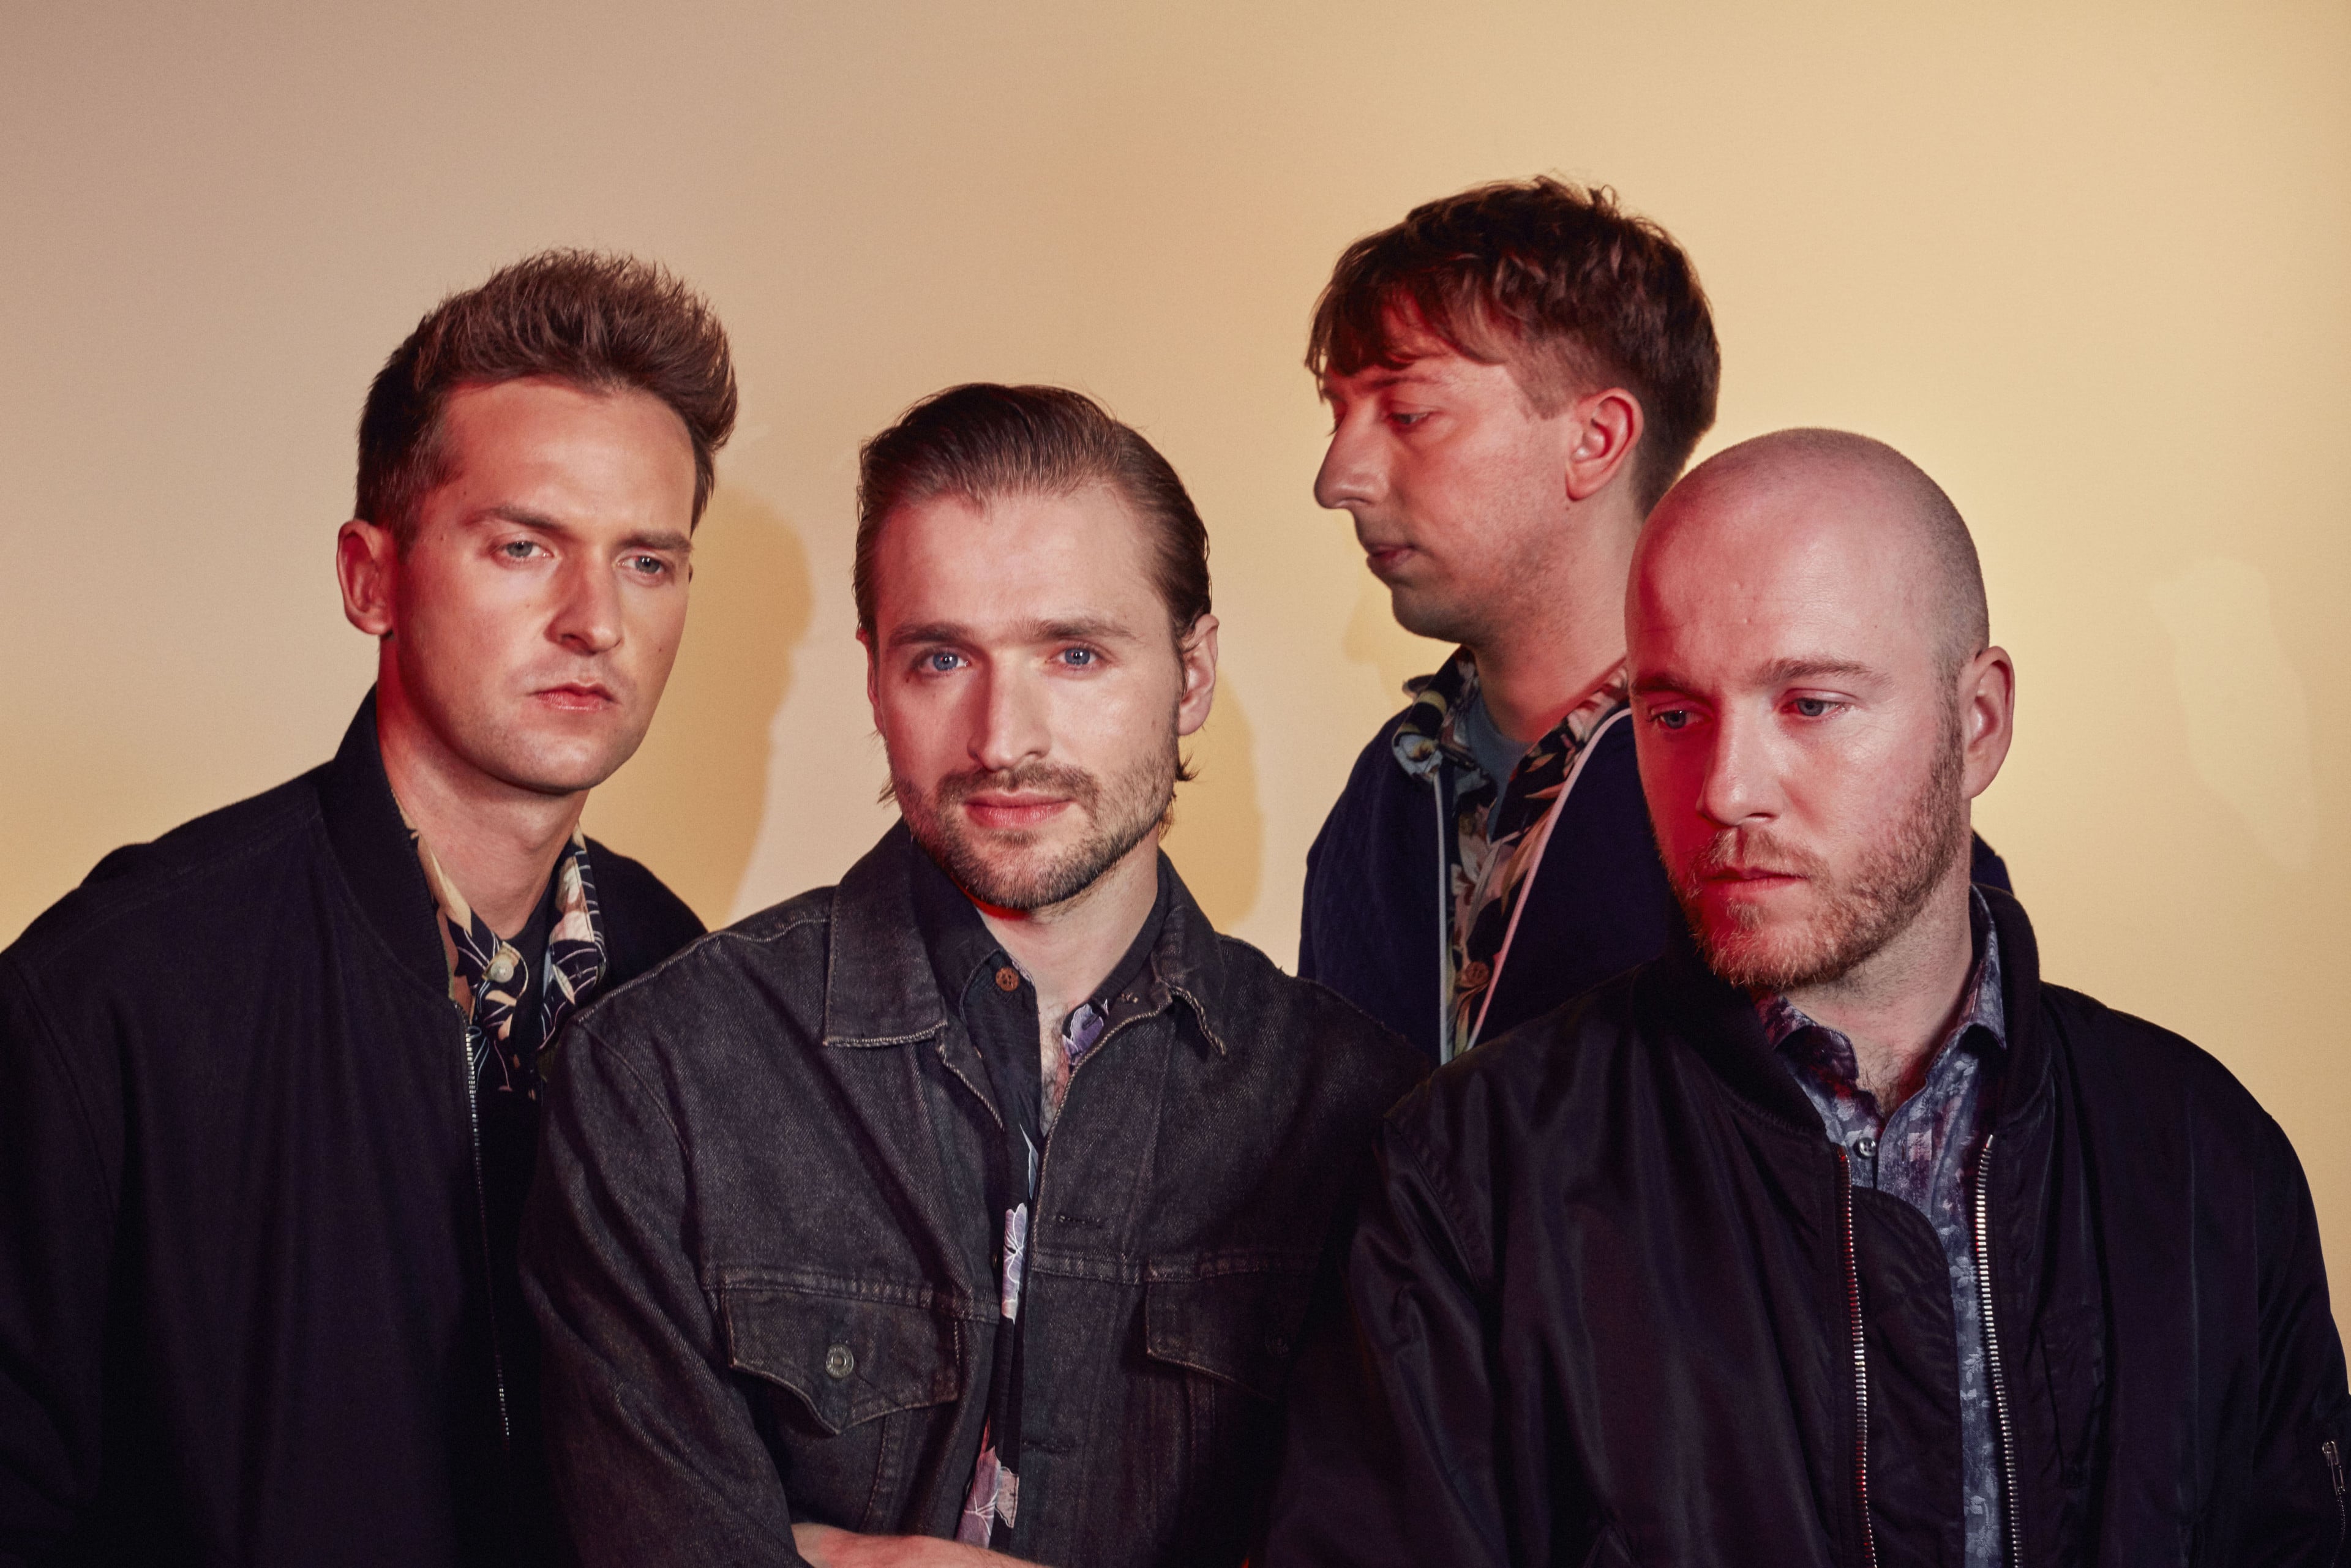 Wild Beasts: Lust For Life